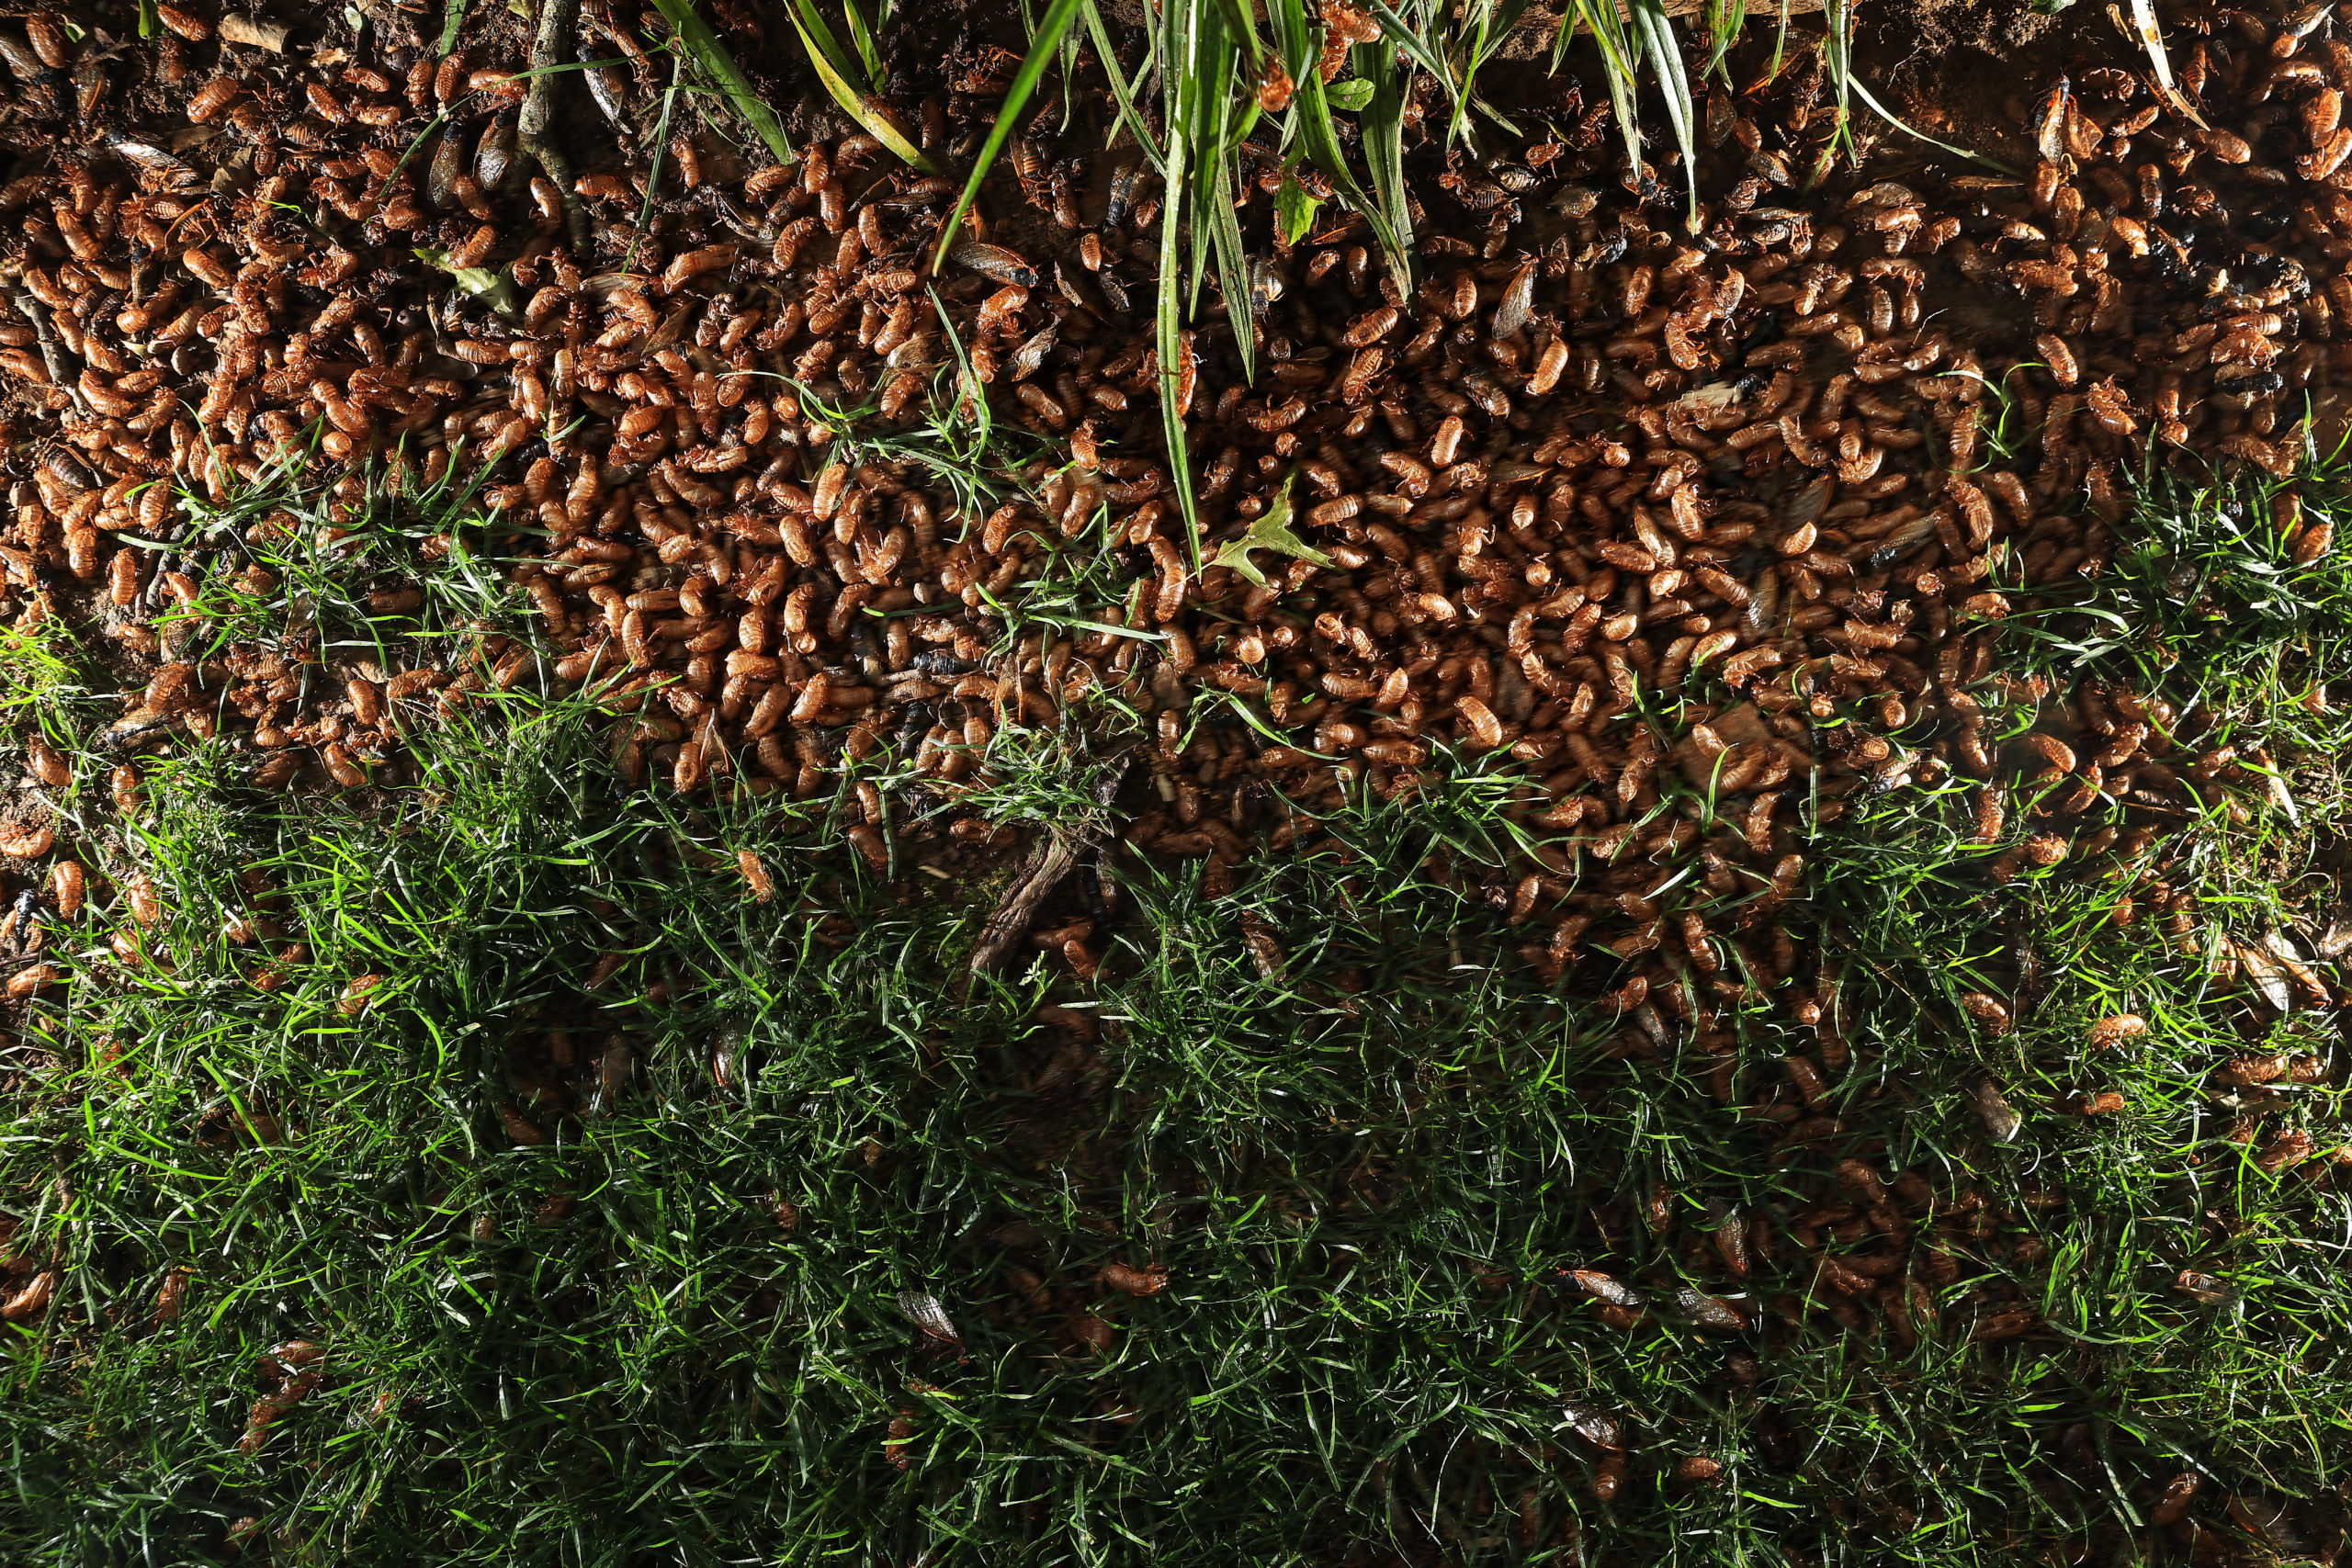 A pile of dead and dying periodical cicadas, a member of Brood X, and their cast off nymph shells collects at the base of a tree. (Photo by Chip Somodevilla/Getty Images)